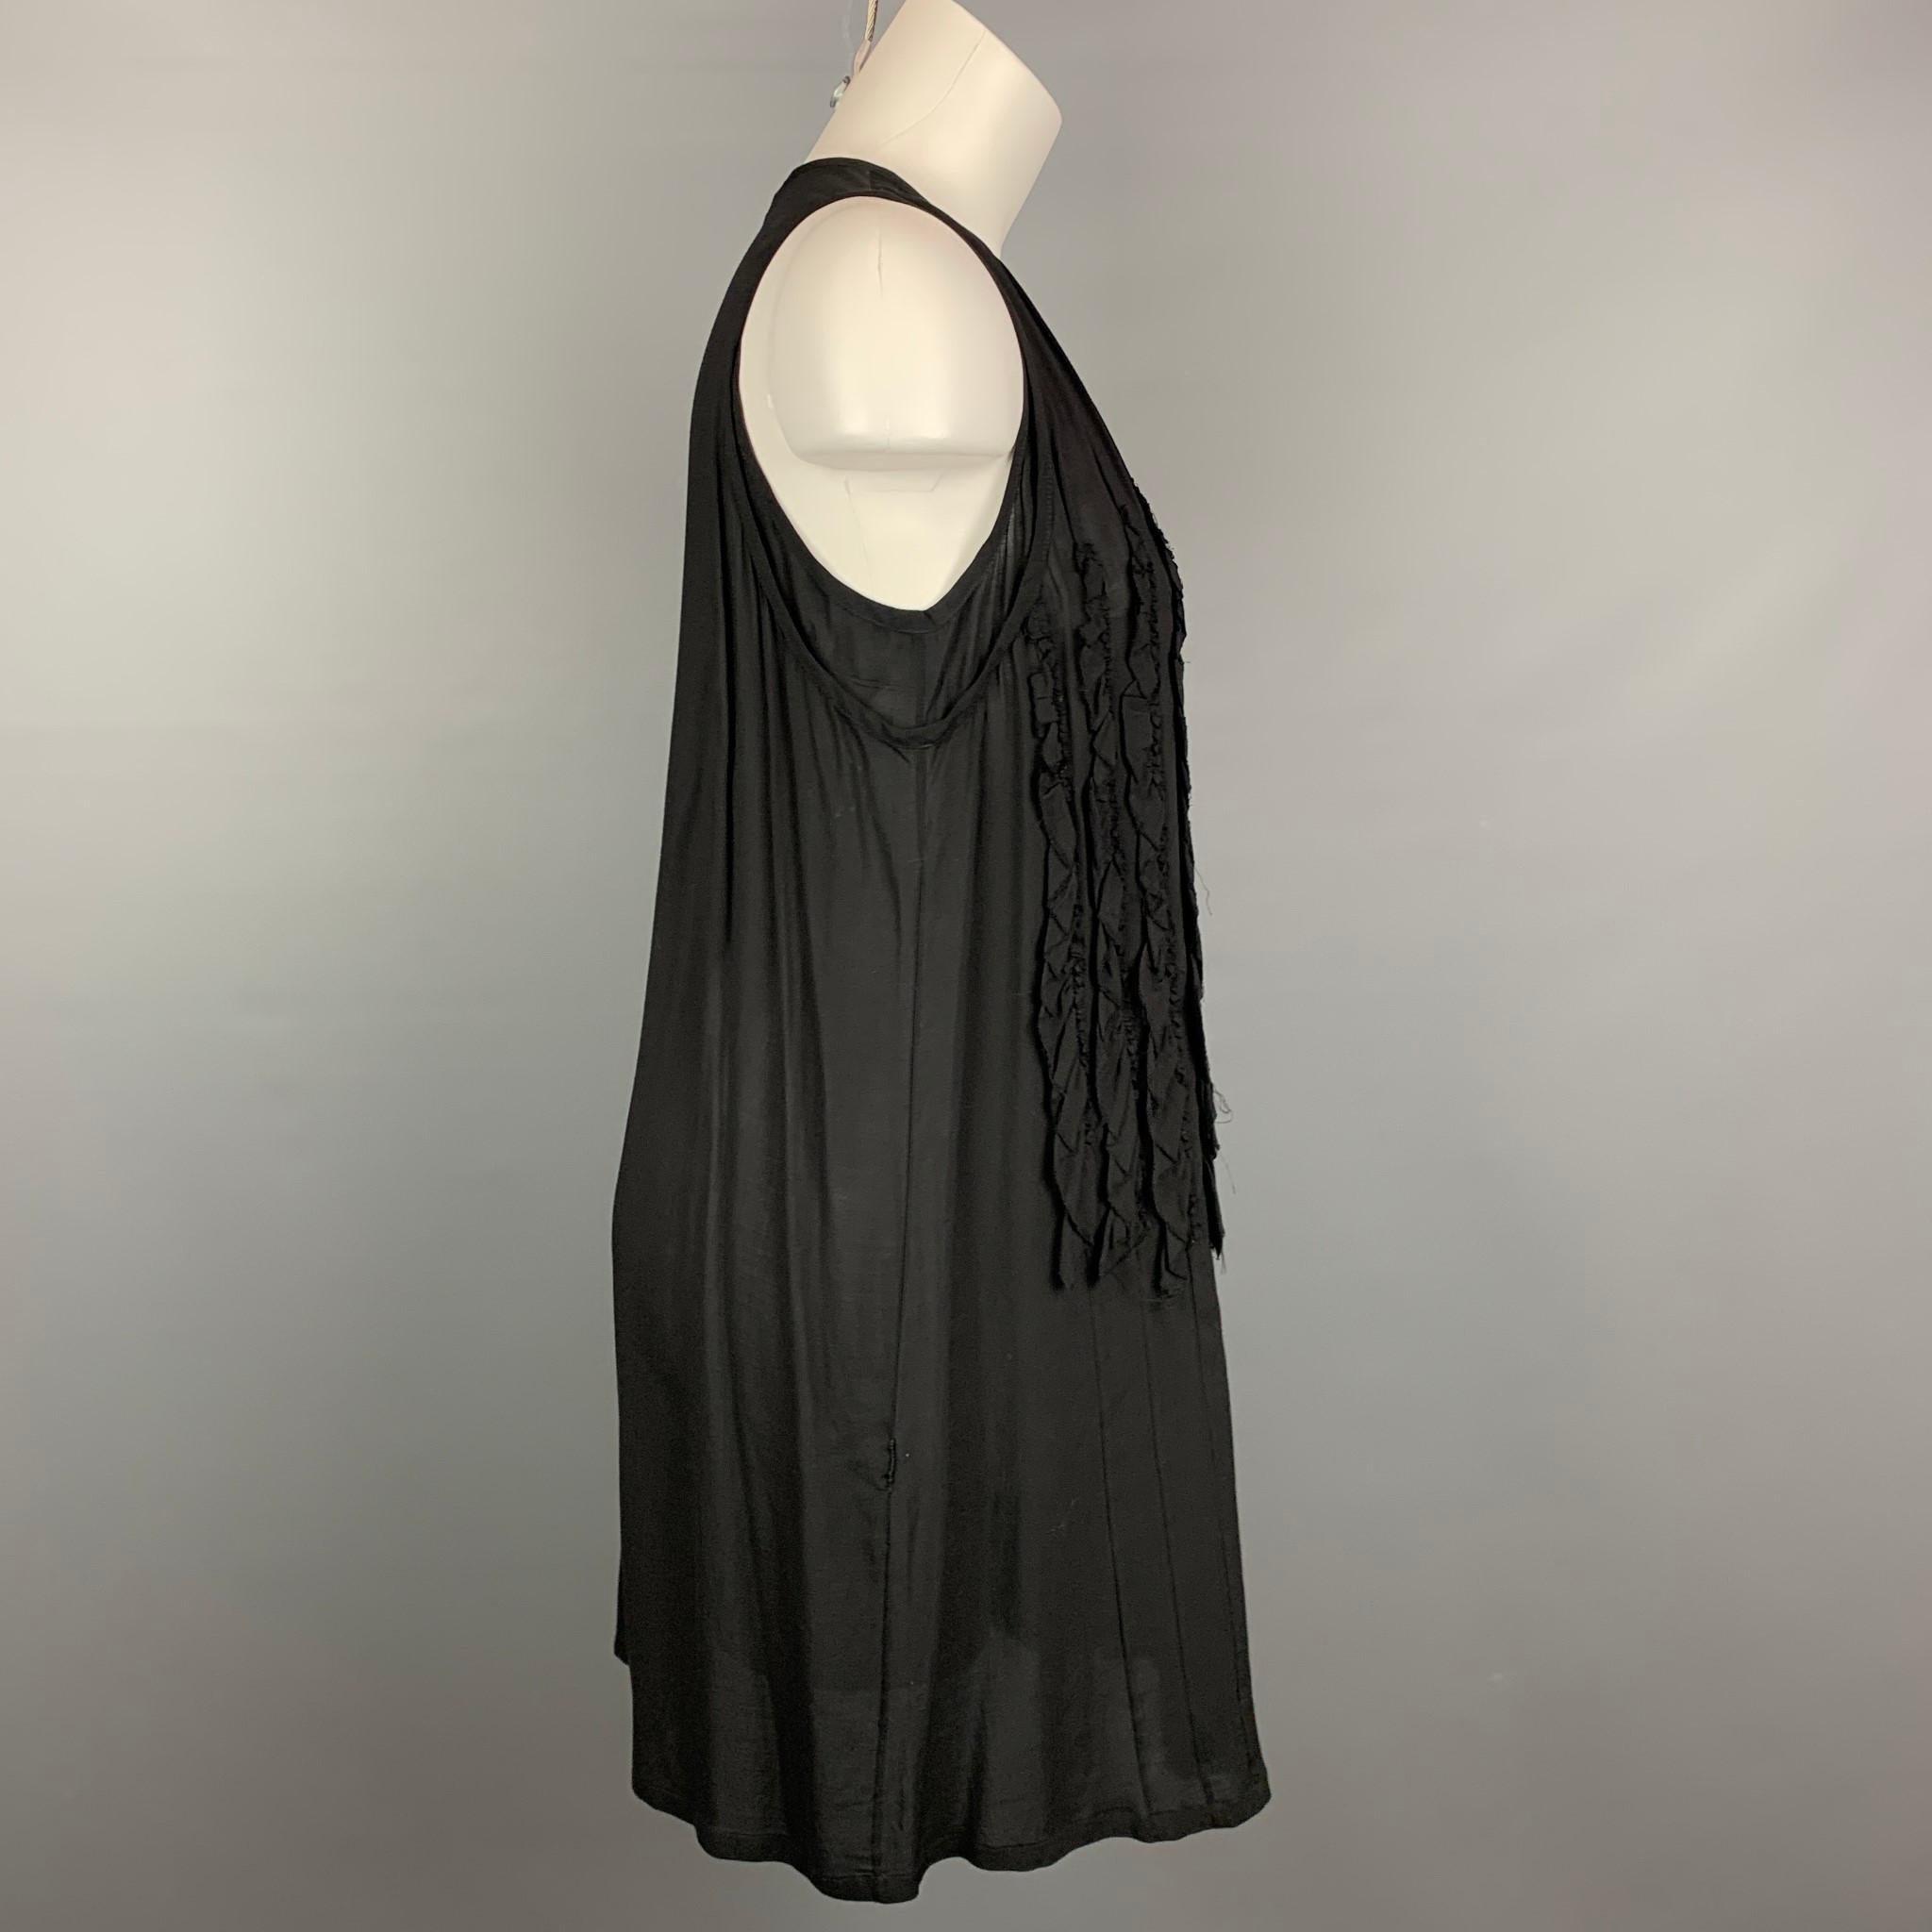 ANN DEMEULEMEESTER sleeveless dress comes in a black sheer material with a front ruffled design featuring a shift style.

Very Good Pre-Owned Condition.
Marked: 36

Measurements:

Bust: 36 in.
Hip: 42 in.
Length: 33.5 in. 